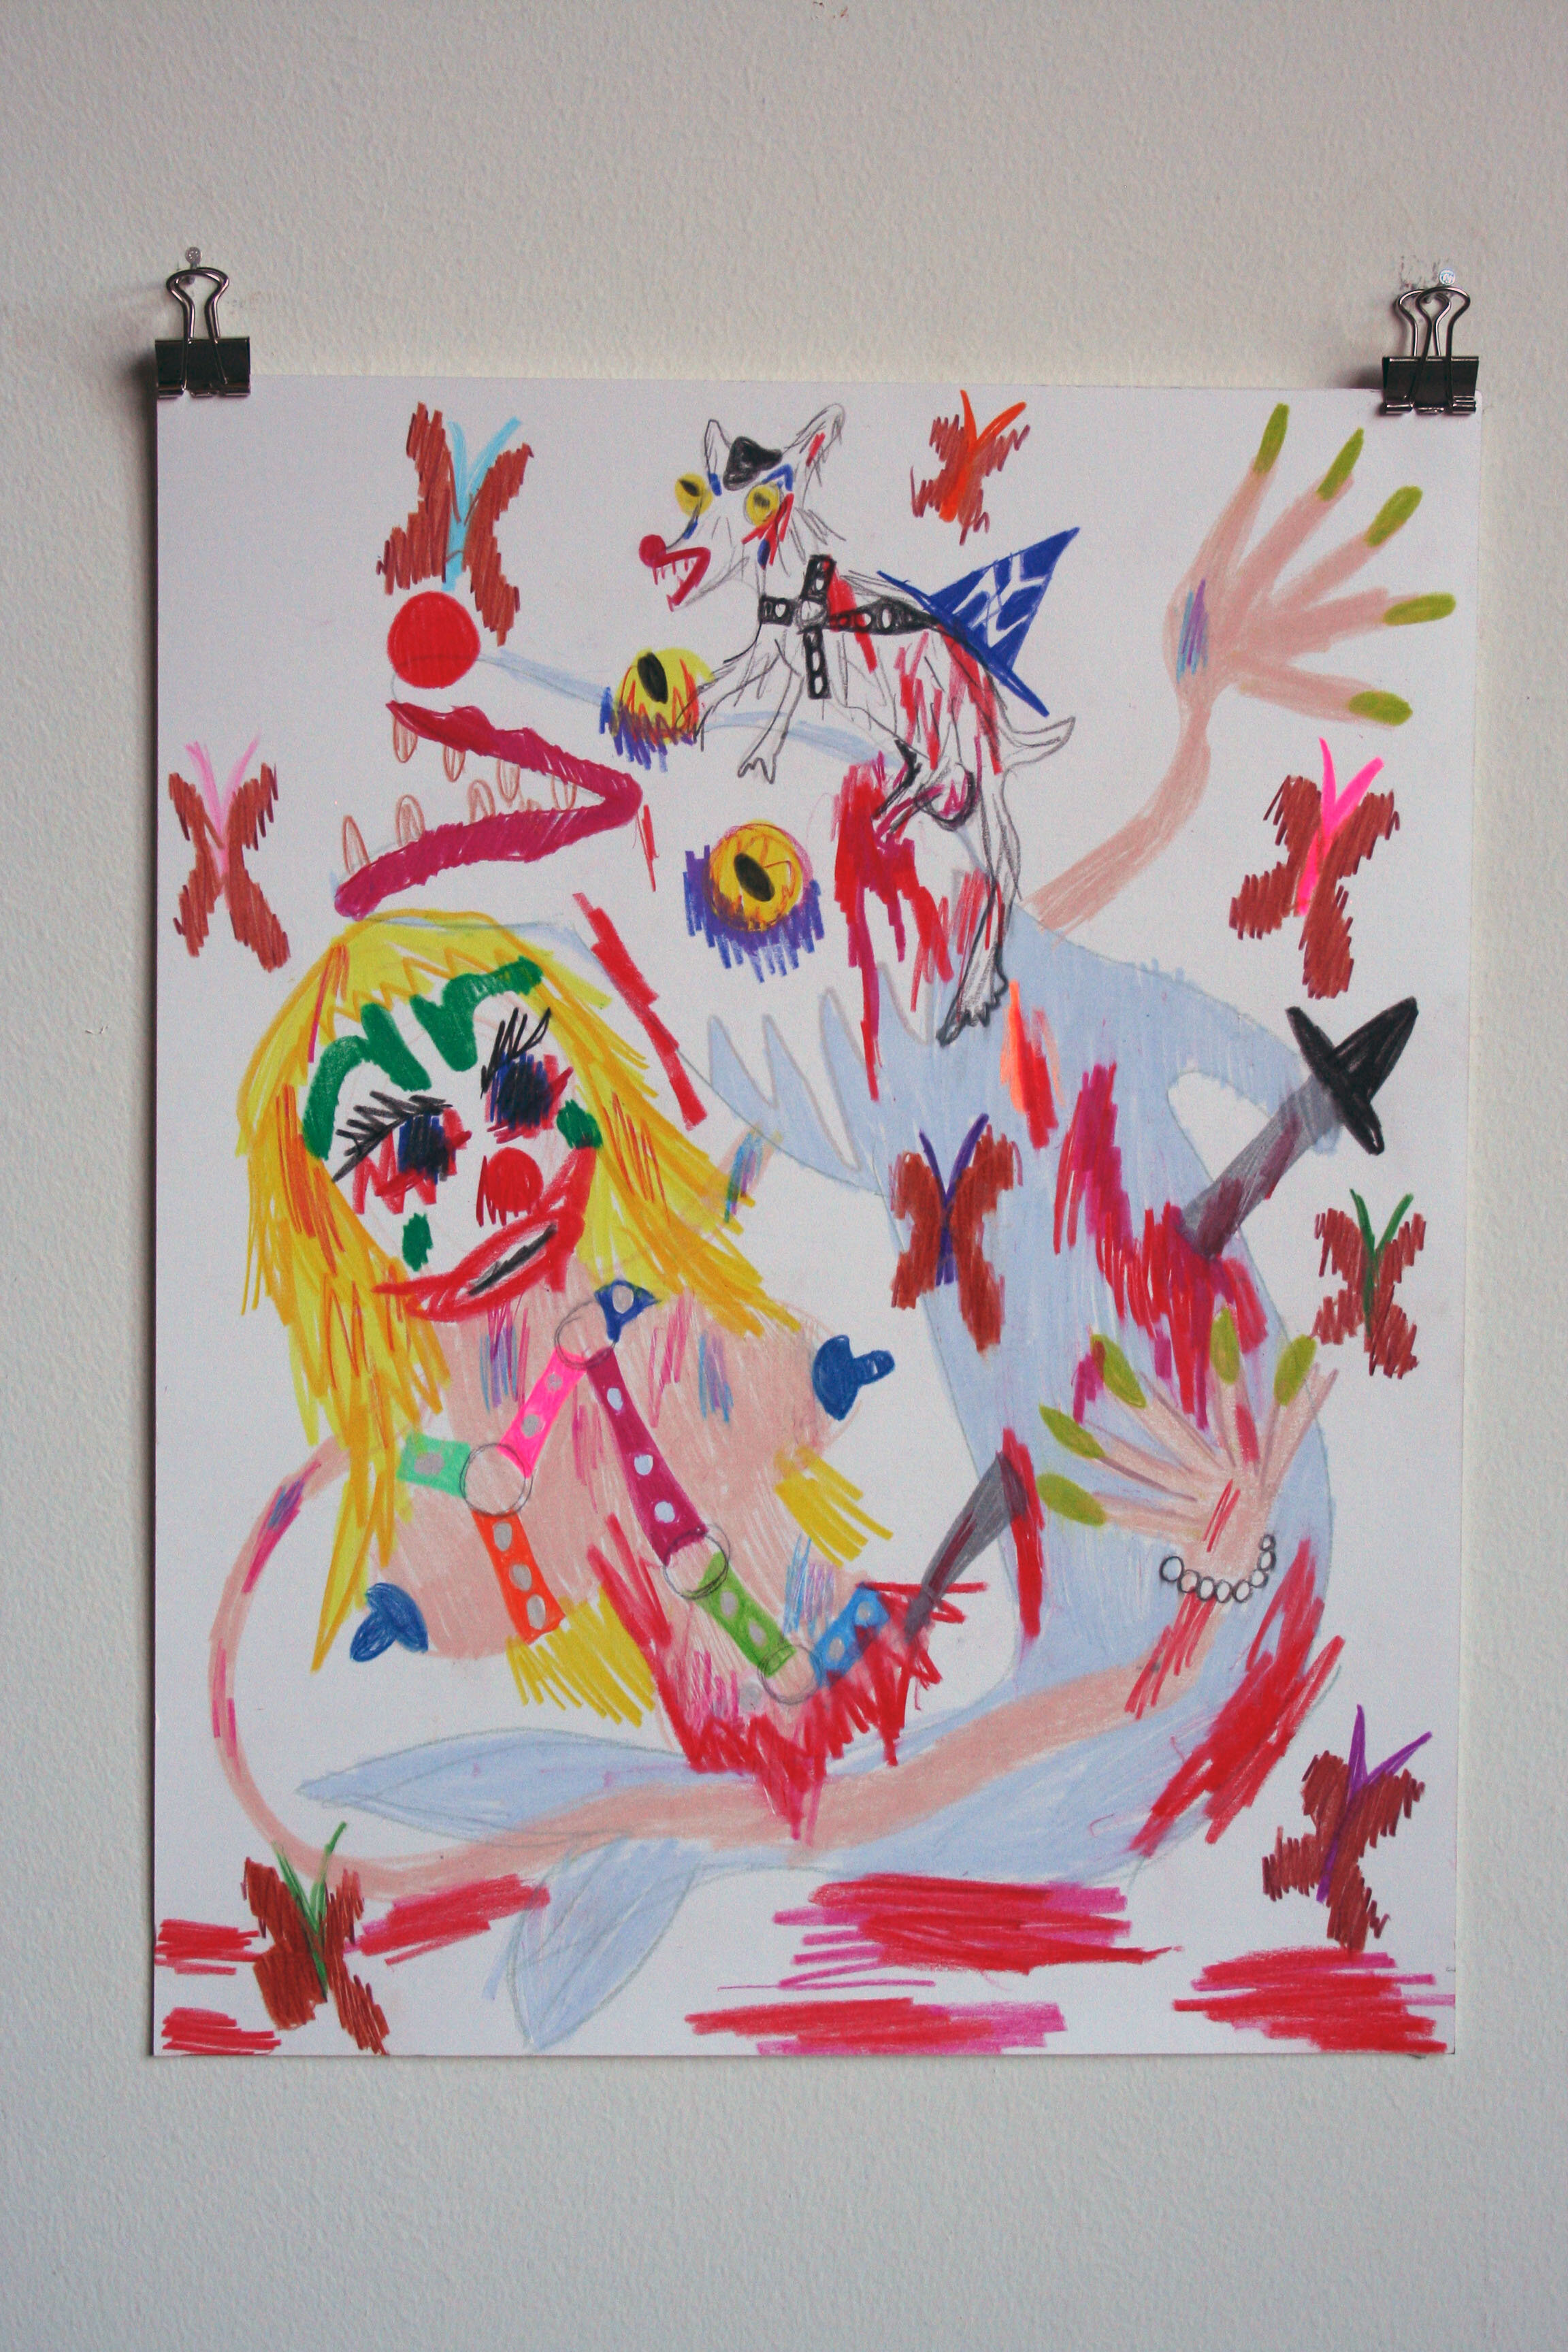   Holiday Fun with Blondes,  2014  14 x 11 inches (35.56 x 27.94 cm.)  Colored pencil on paper 